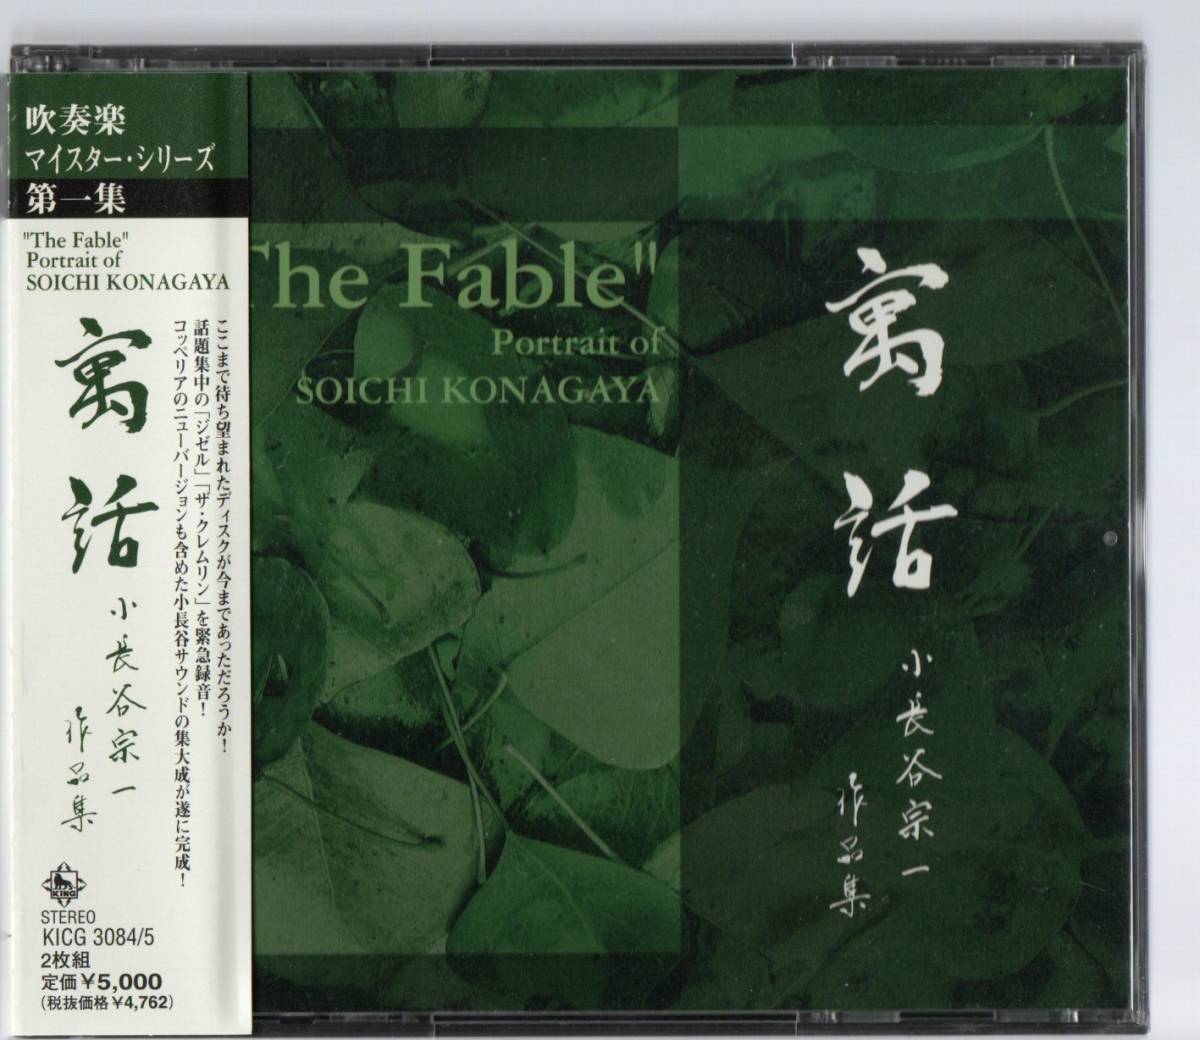 Free shipping / Brass band CD / Soichi Konagae collection: Fables / Out of print / Ballet suite Giselle / Murasaki Shikibu fantasy / Coppelia / Dream / Mountain story / Crane port / Symphonic painting Kremlin, CD, classic, Brass band